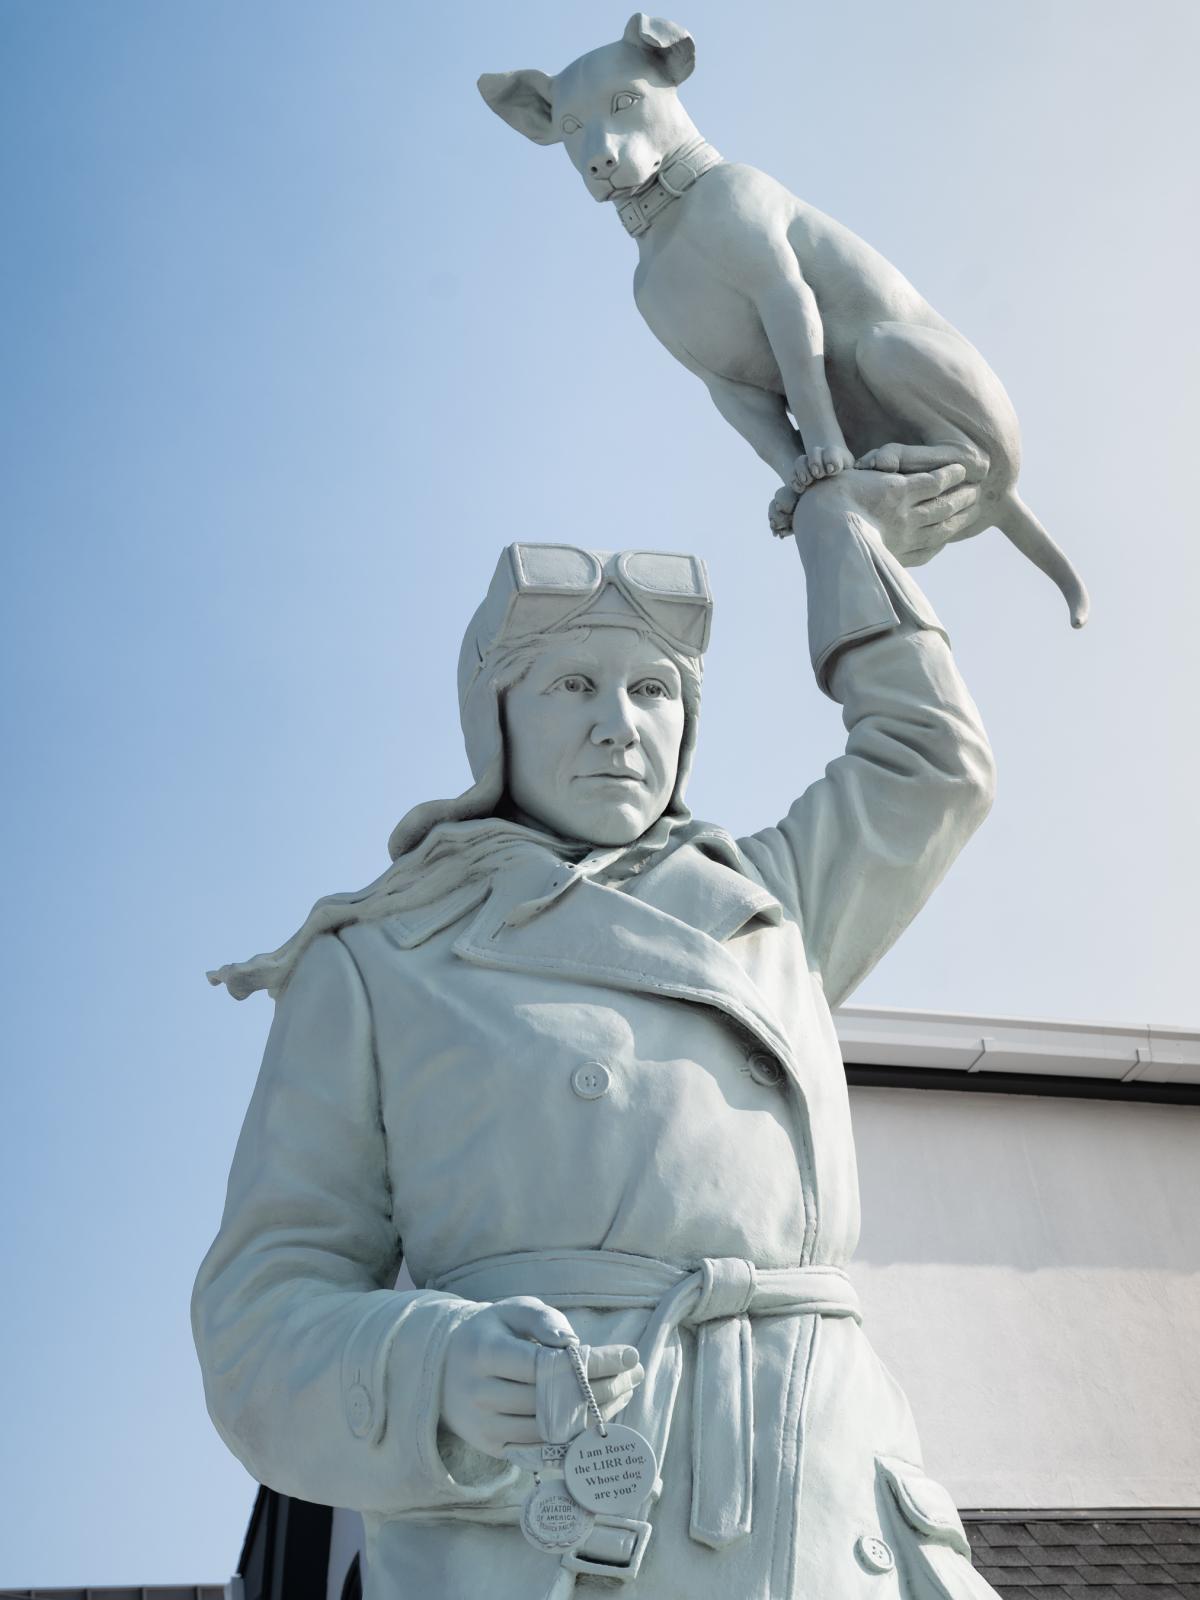 Detail of a tall bronze artwork featuring a woman in an early twentieth century pilot’s uniform holding up a dog with one hand.